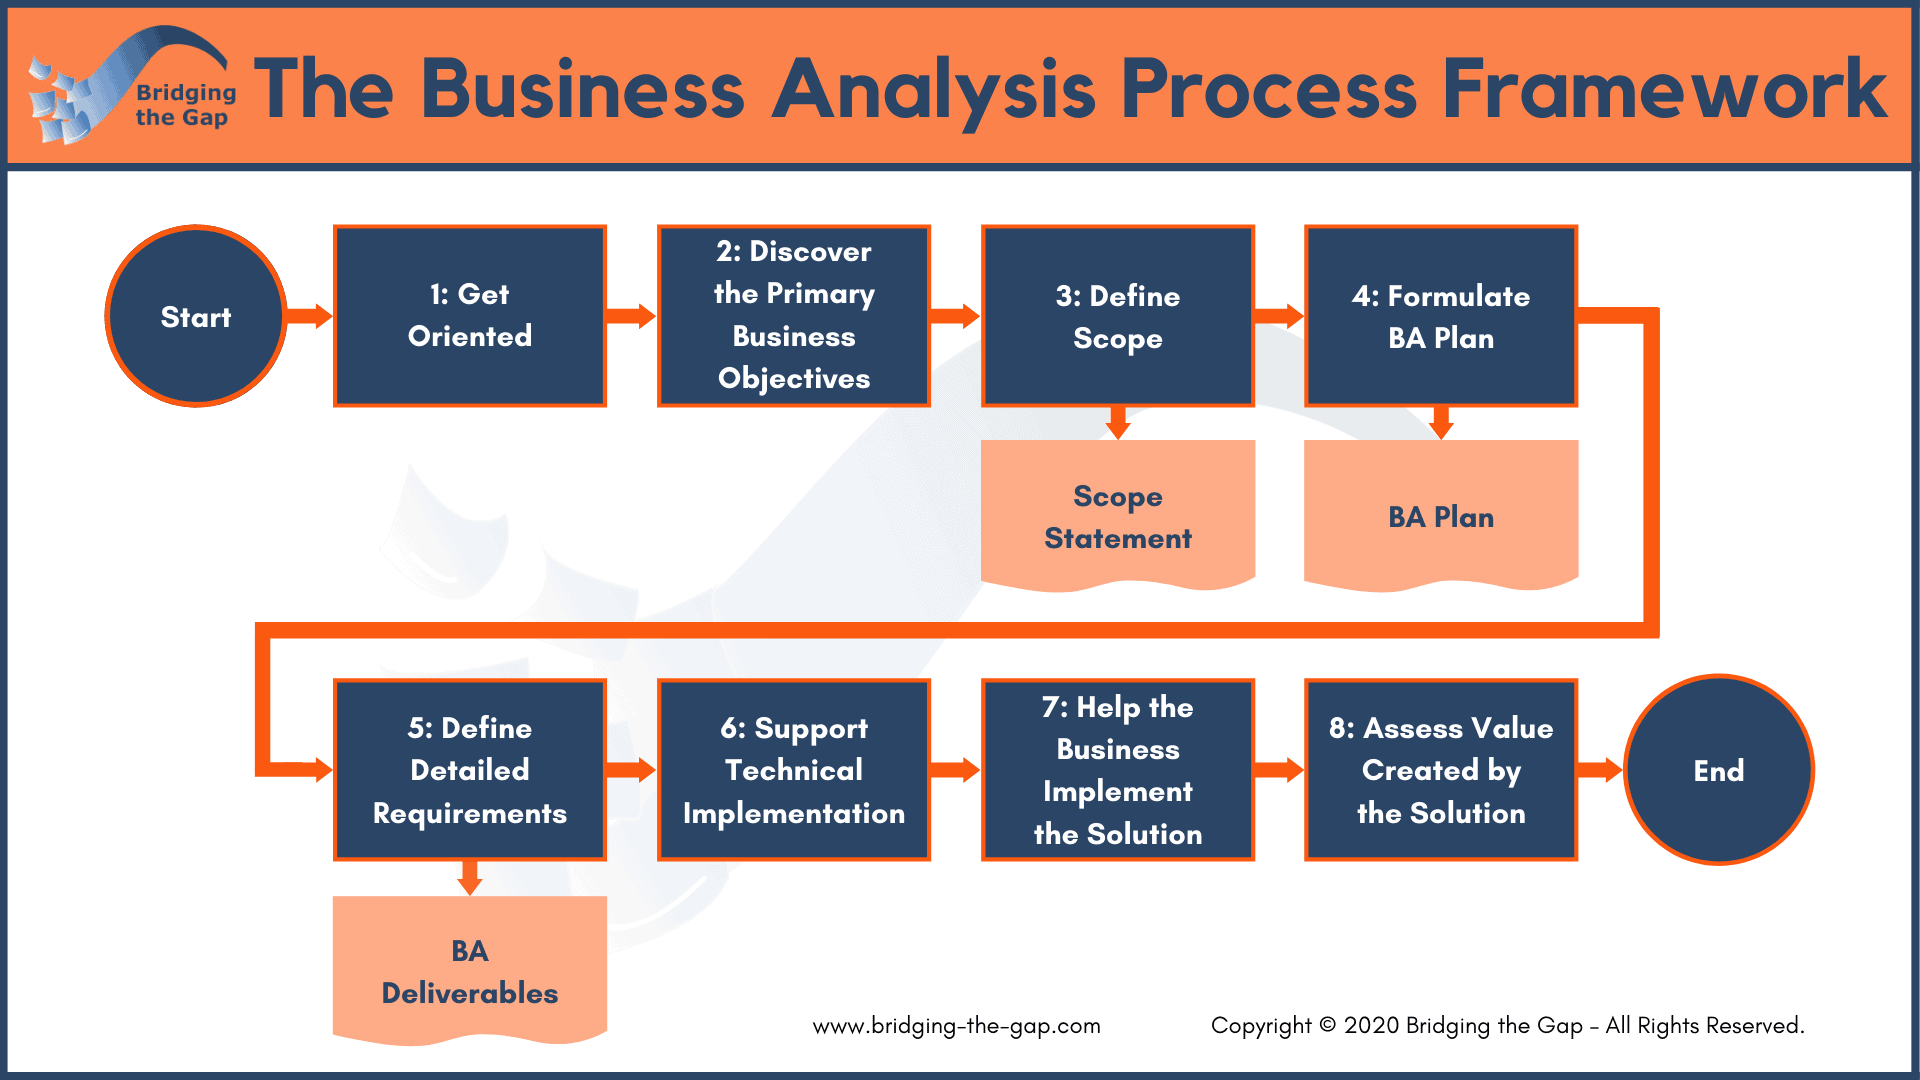 interview questions on business process modeling examples